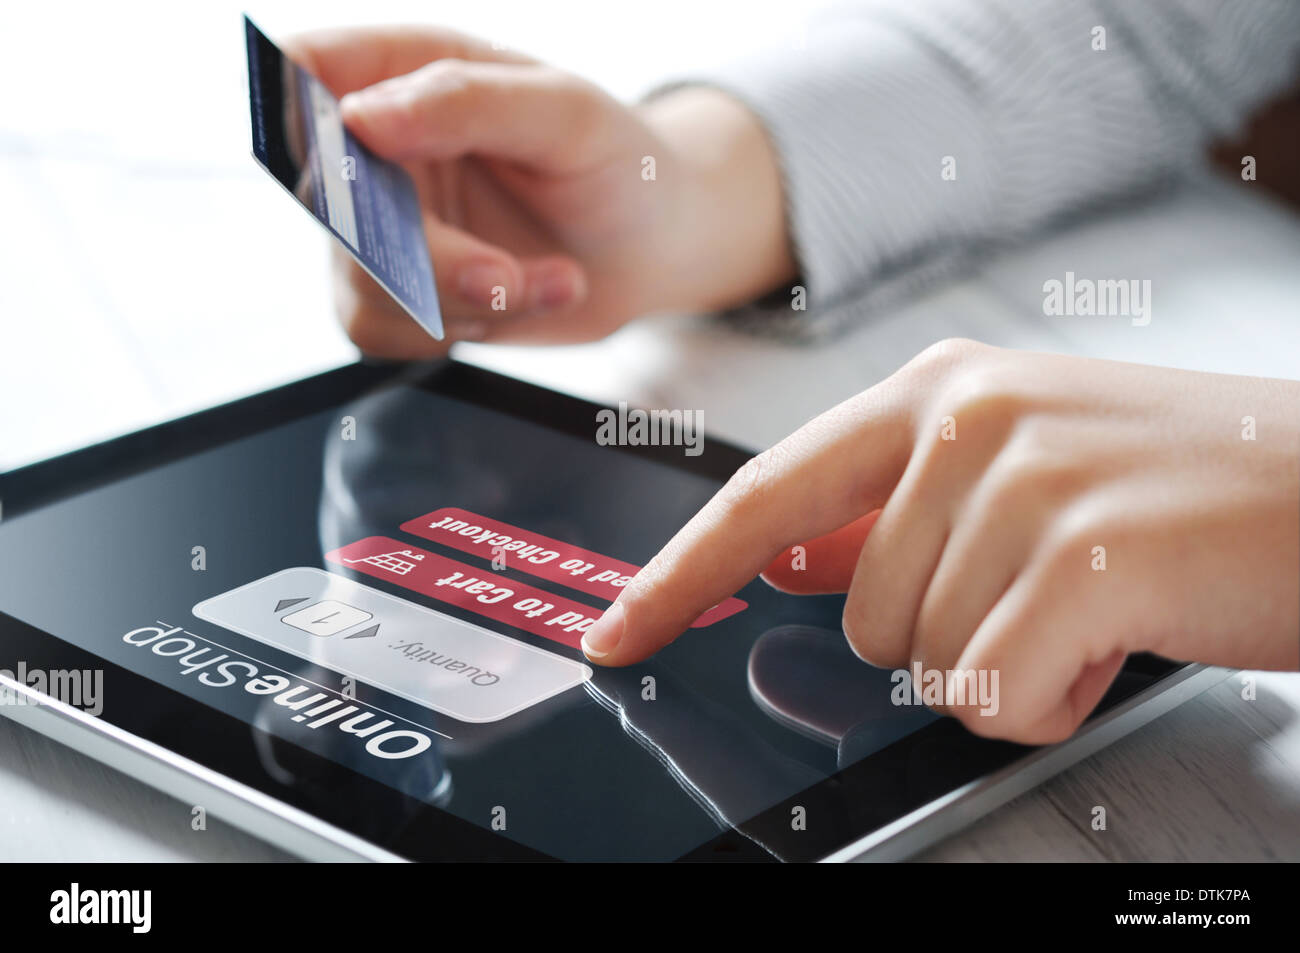 Female hands using touch screen device for online payment Stock Photo